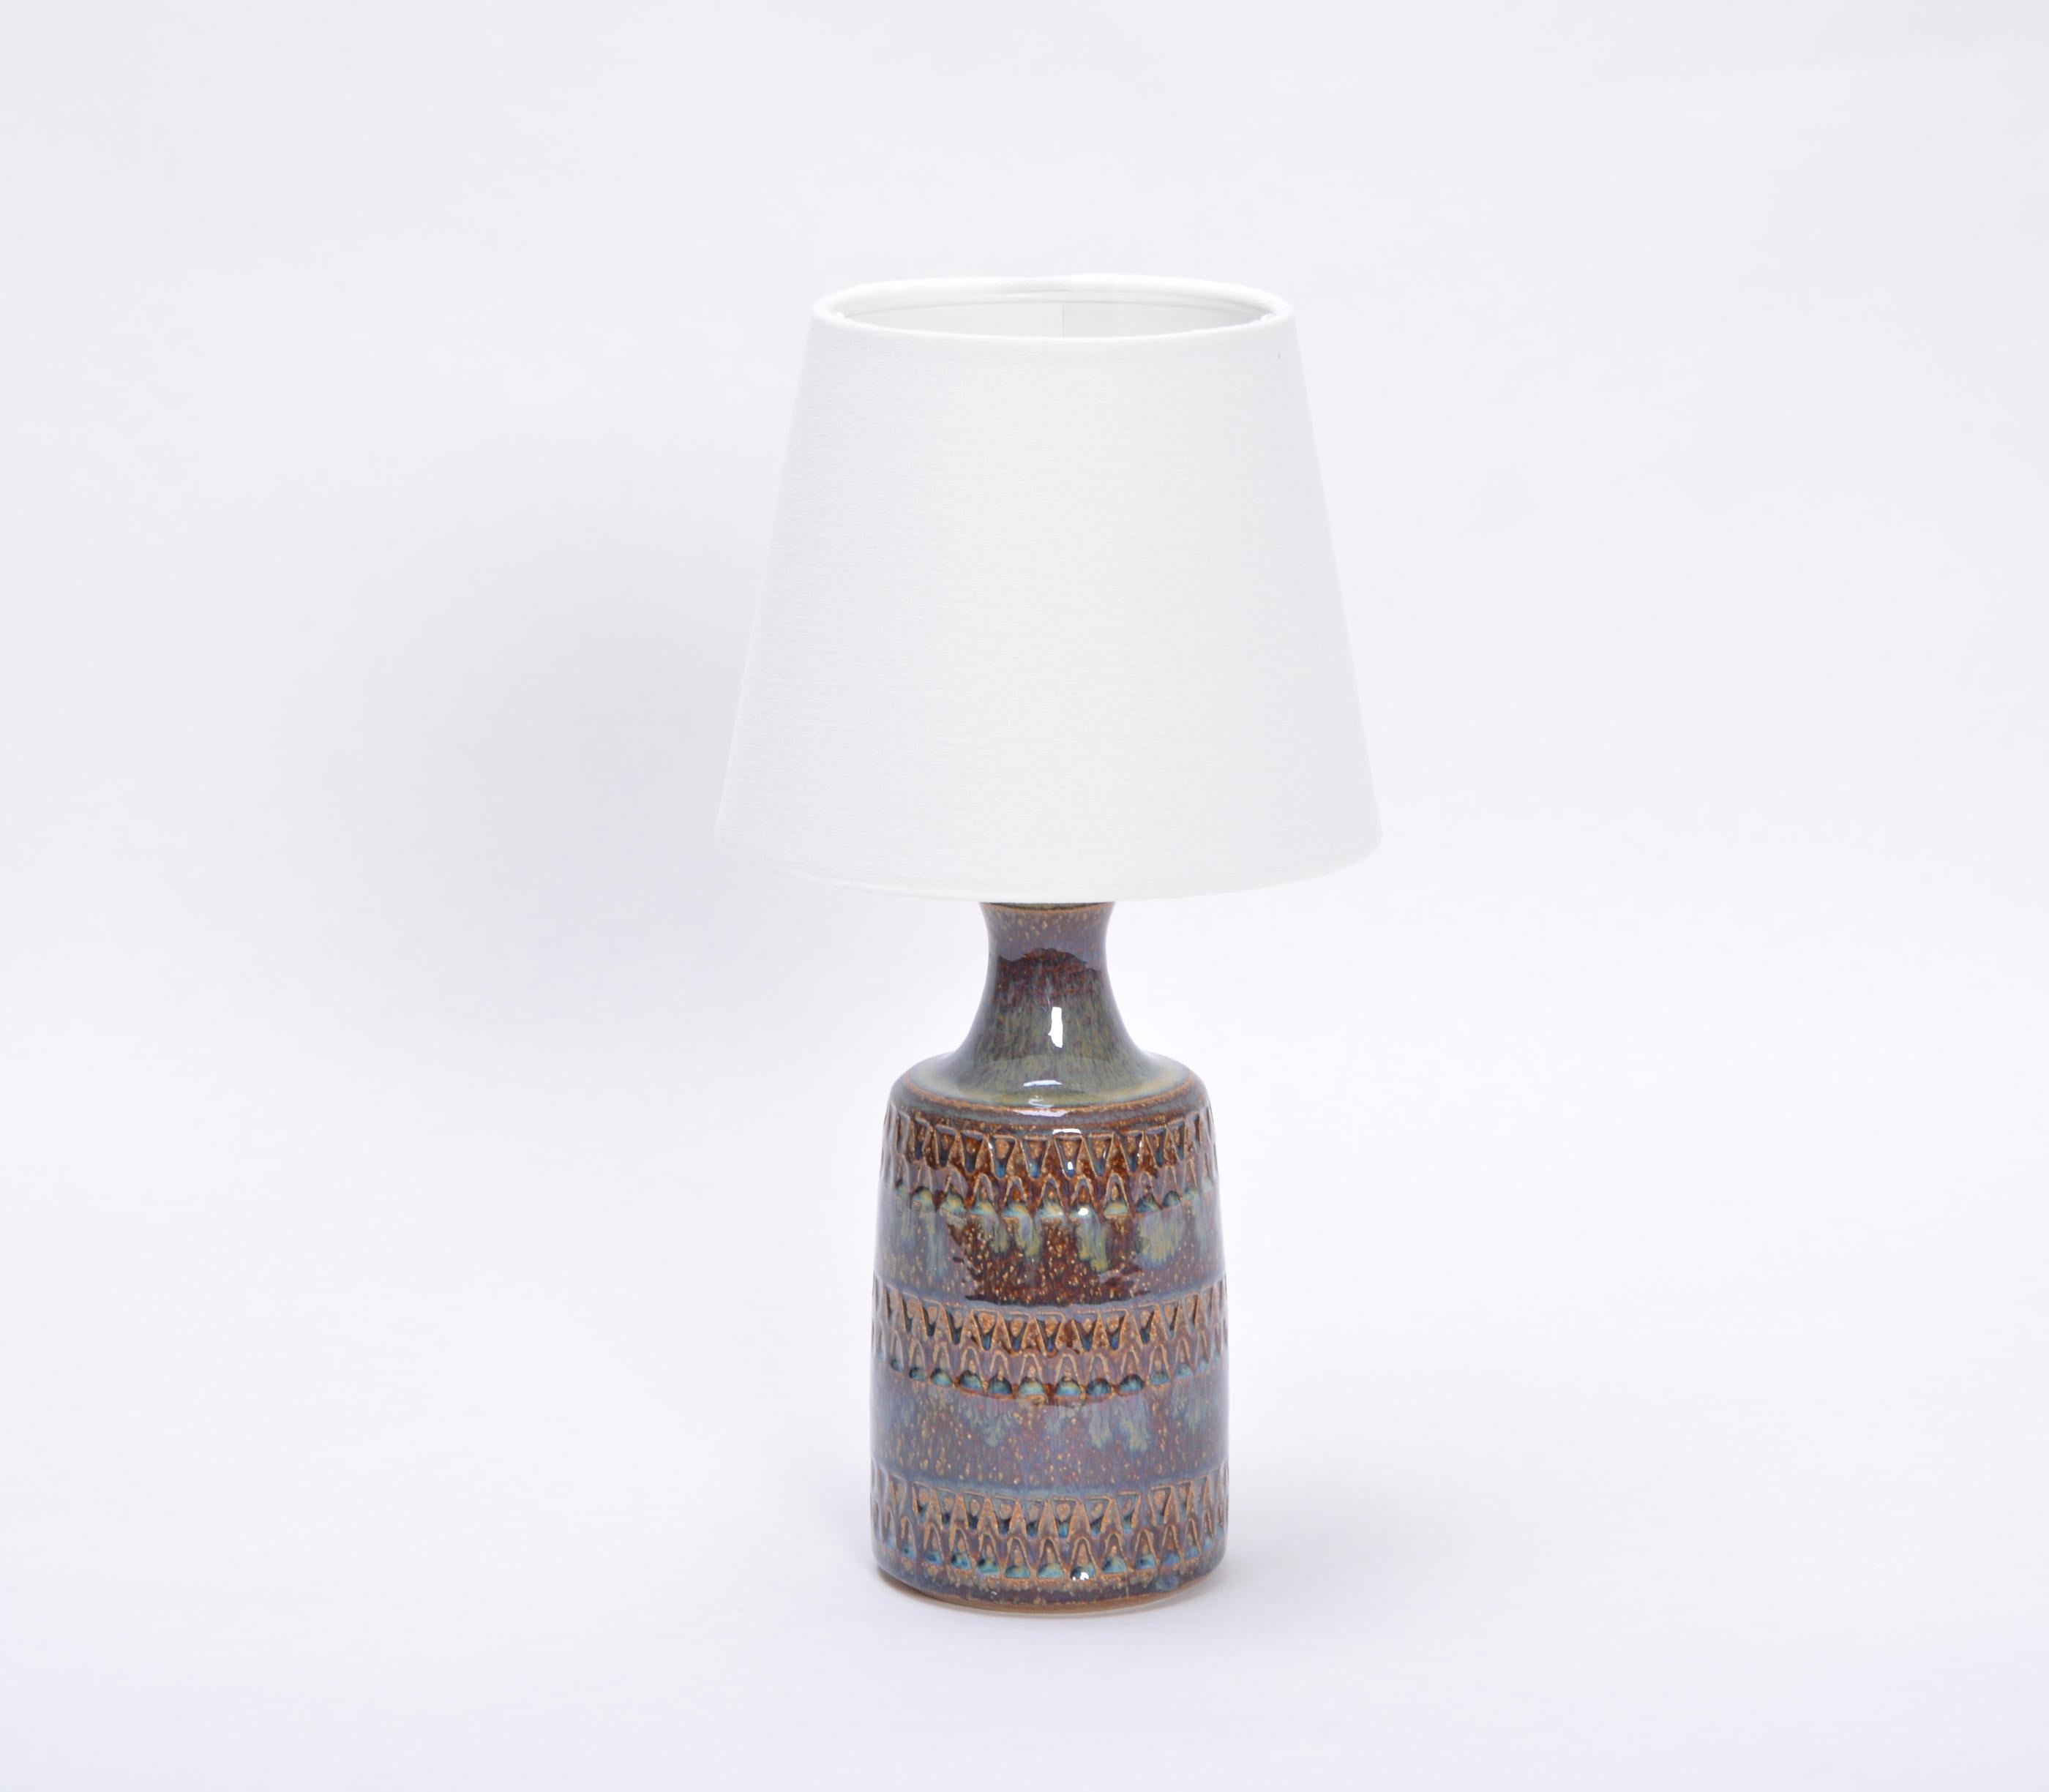 Hand made Danish mid-century ceramic table lamp model 3034 by Soholm Stentoj
Handmade and hand decorated Danish modern stoneware table lamp manufactured by Søholm Stentøj on the Danish island of Bornholm in the 1960s. Light blue glaze flows down